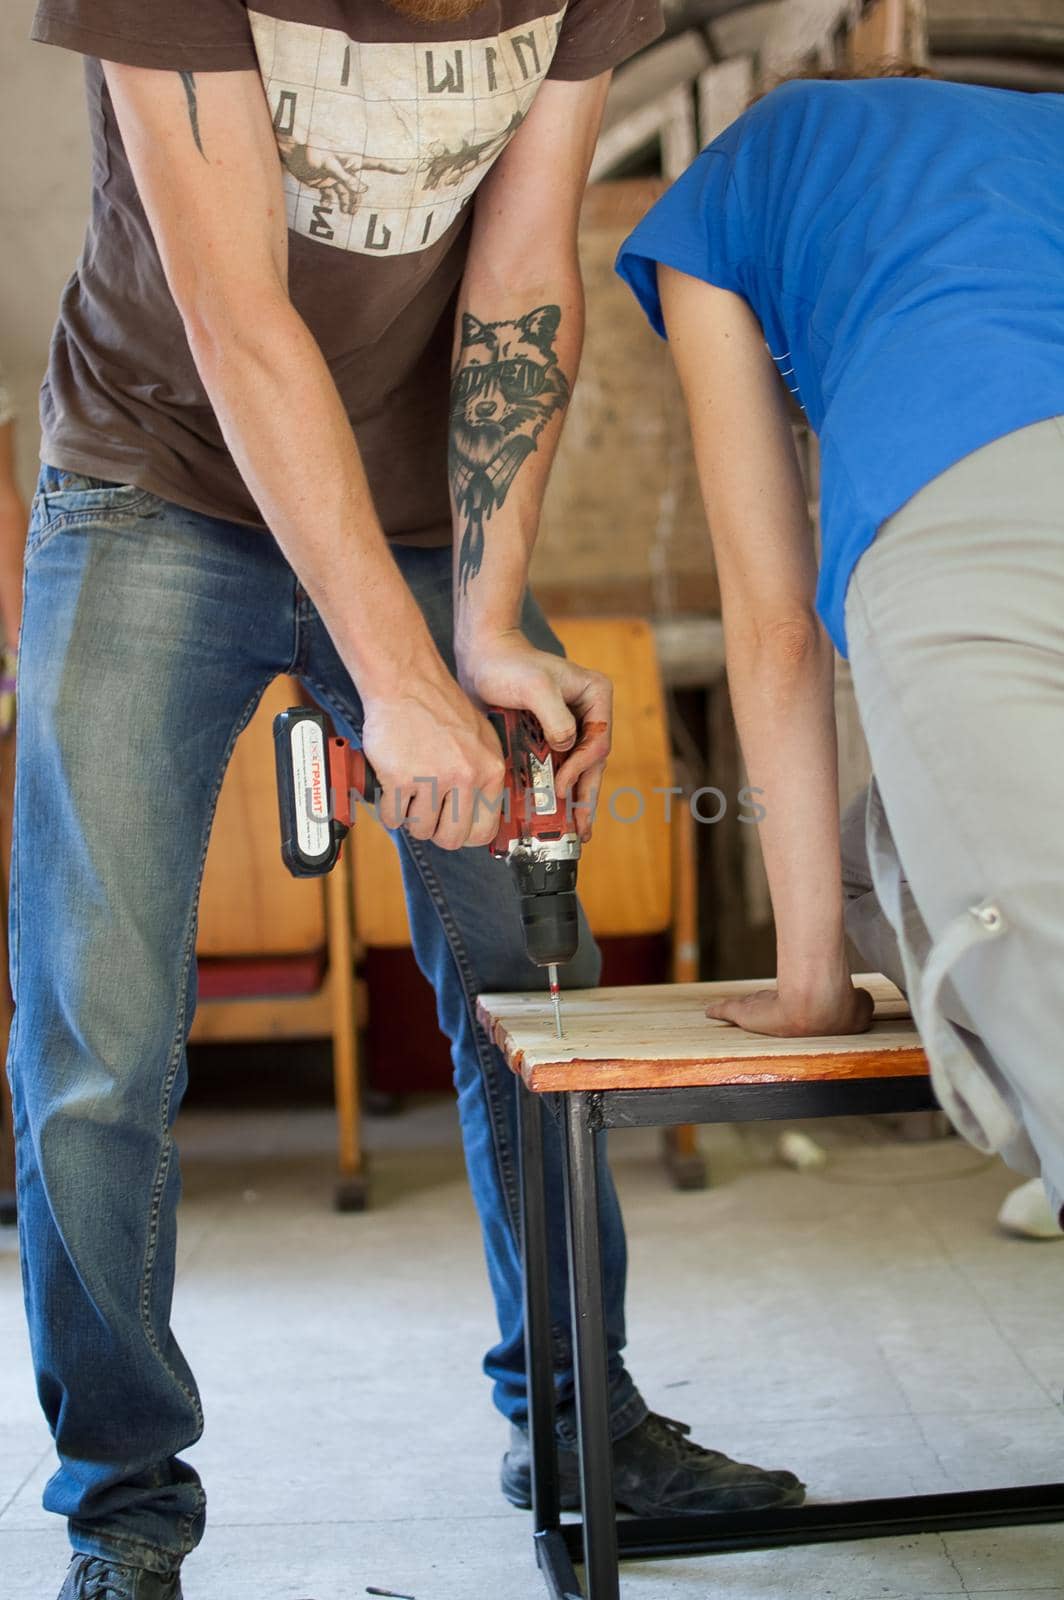 13.08.2021 - Ukraine, Goshcha, group of young workers is using power screwdriver drilling, hambler during construction wooden bench, do it together.